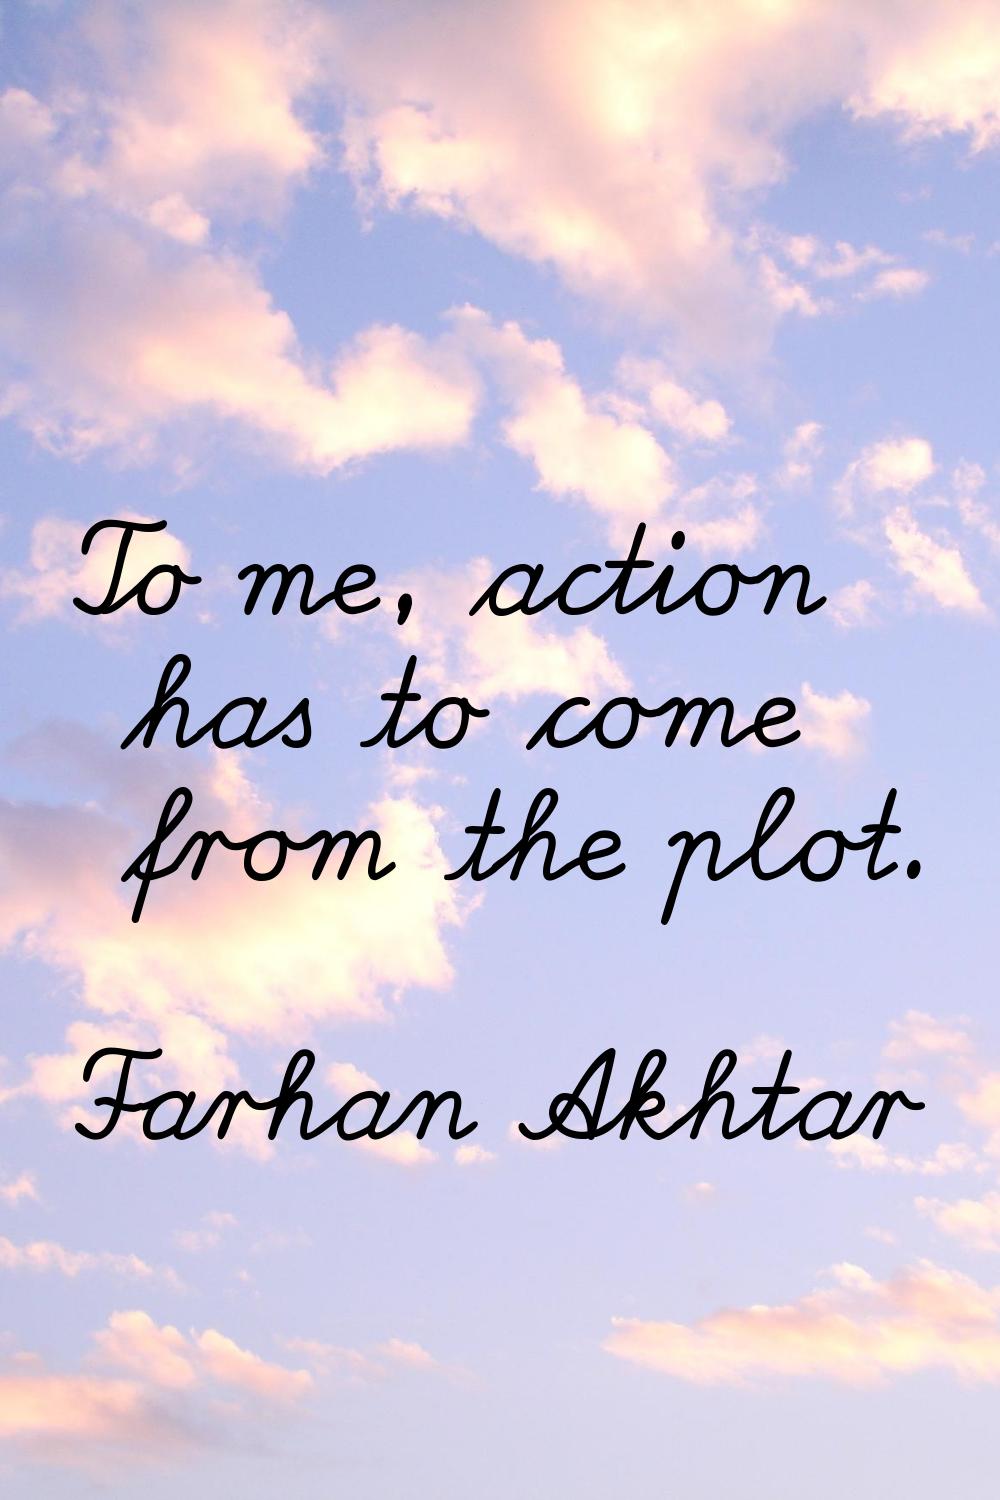 To me, action has to come from the plot.